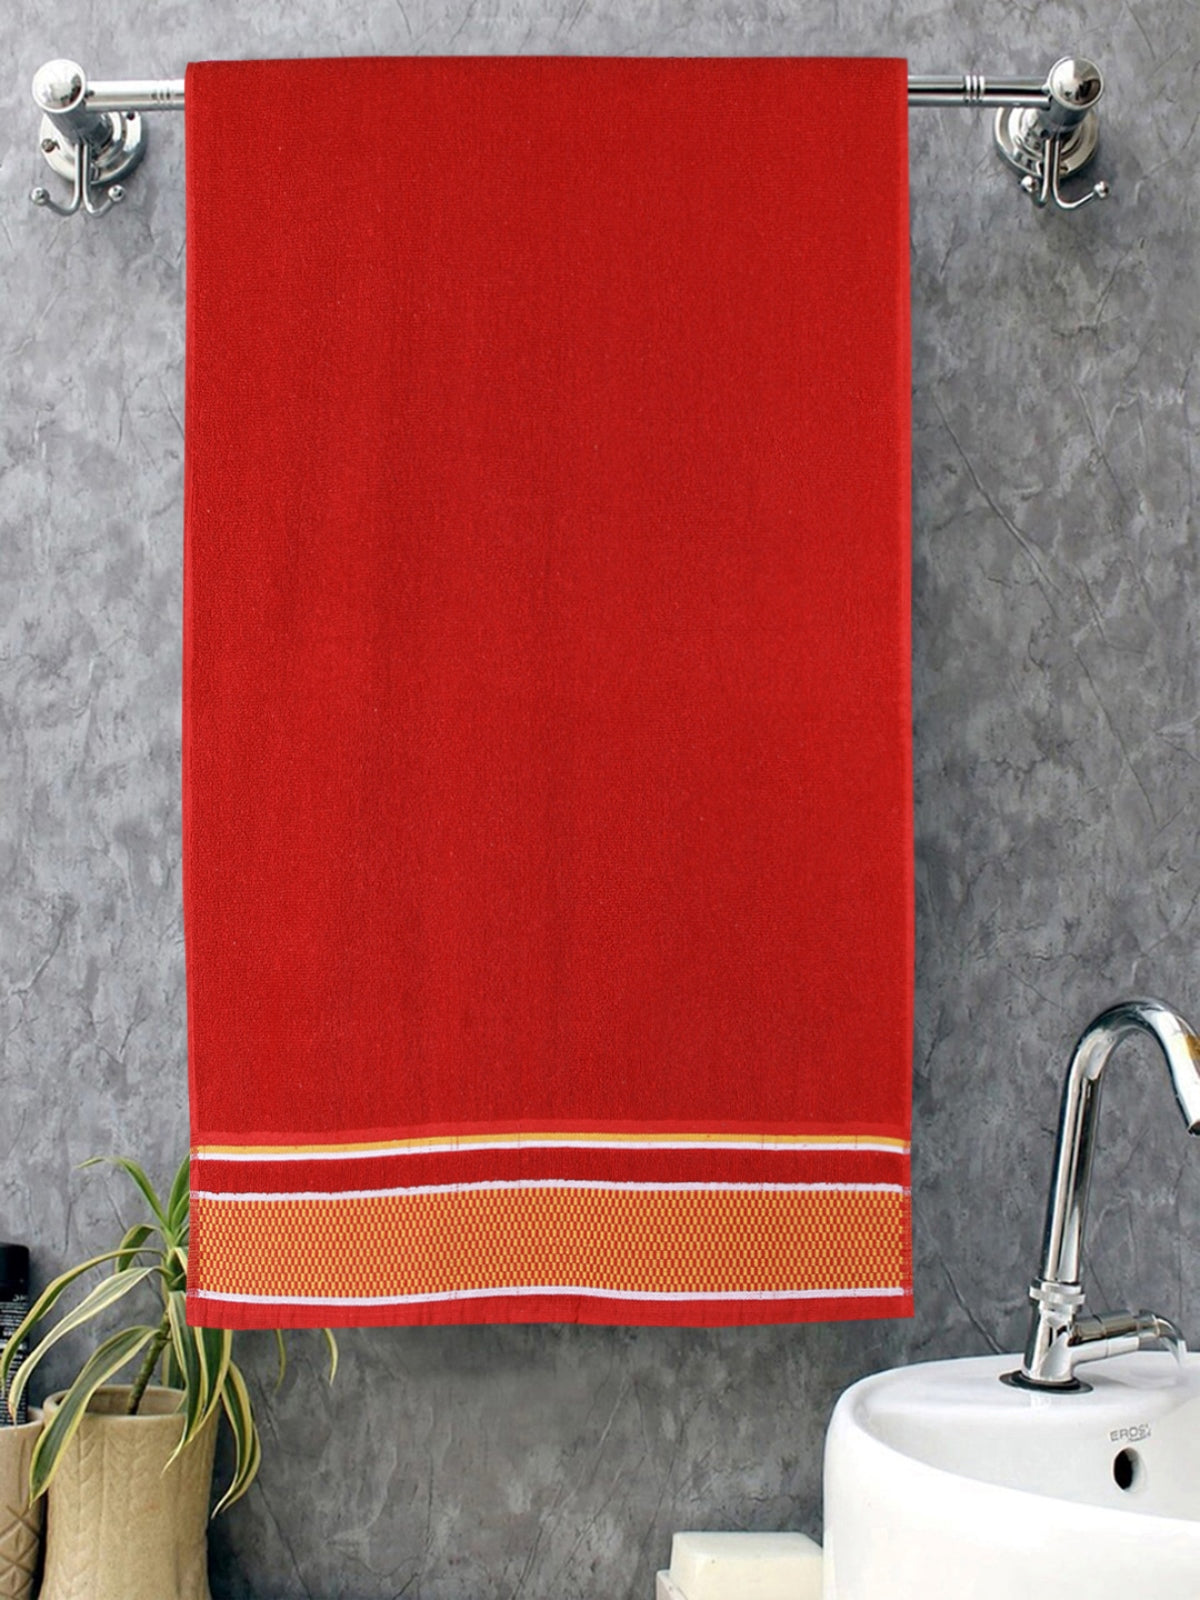 Set of 2 Red Solid Cotton Towels